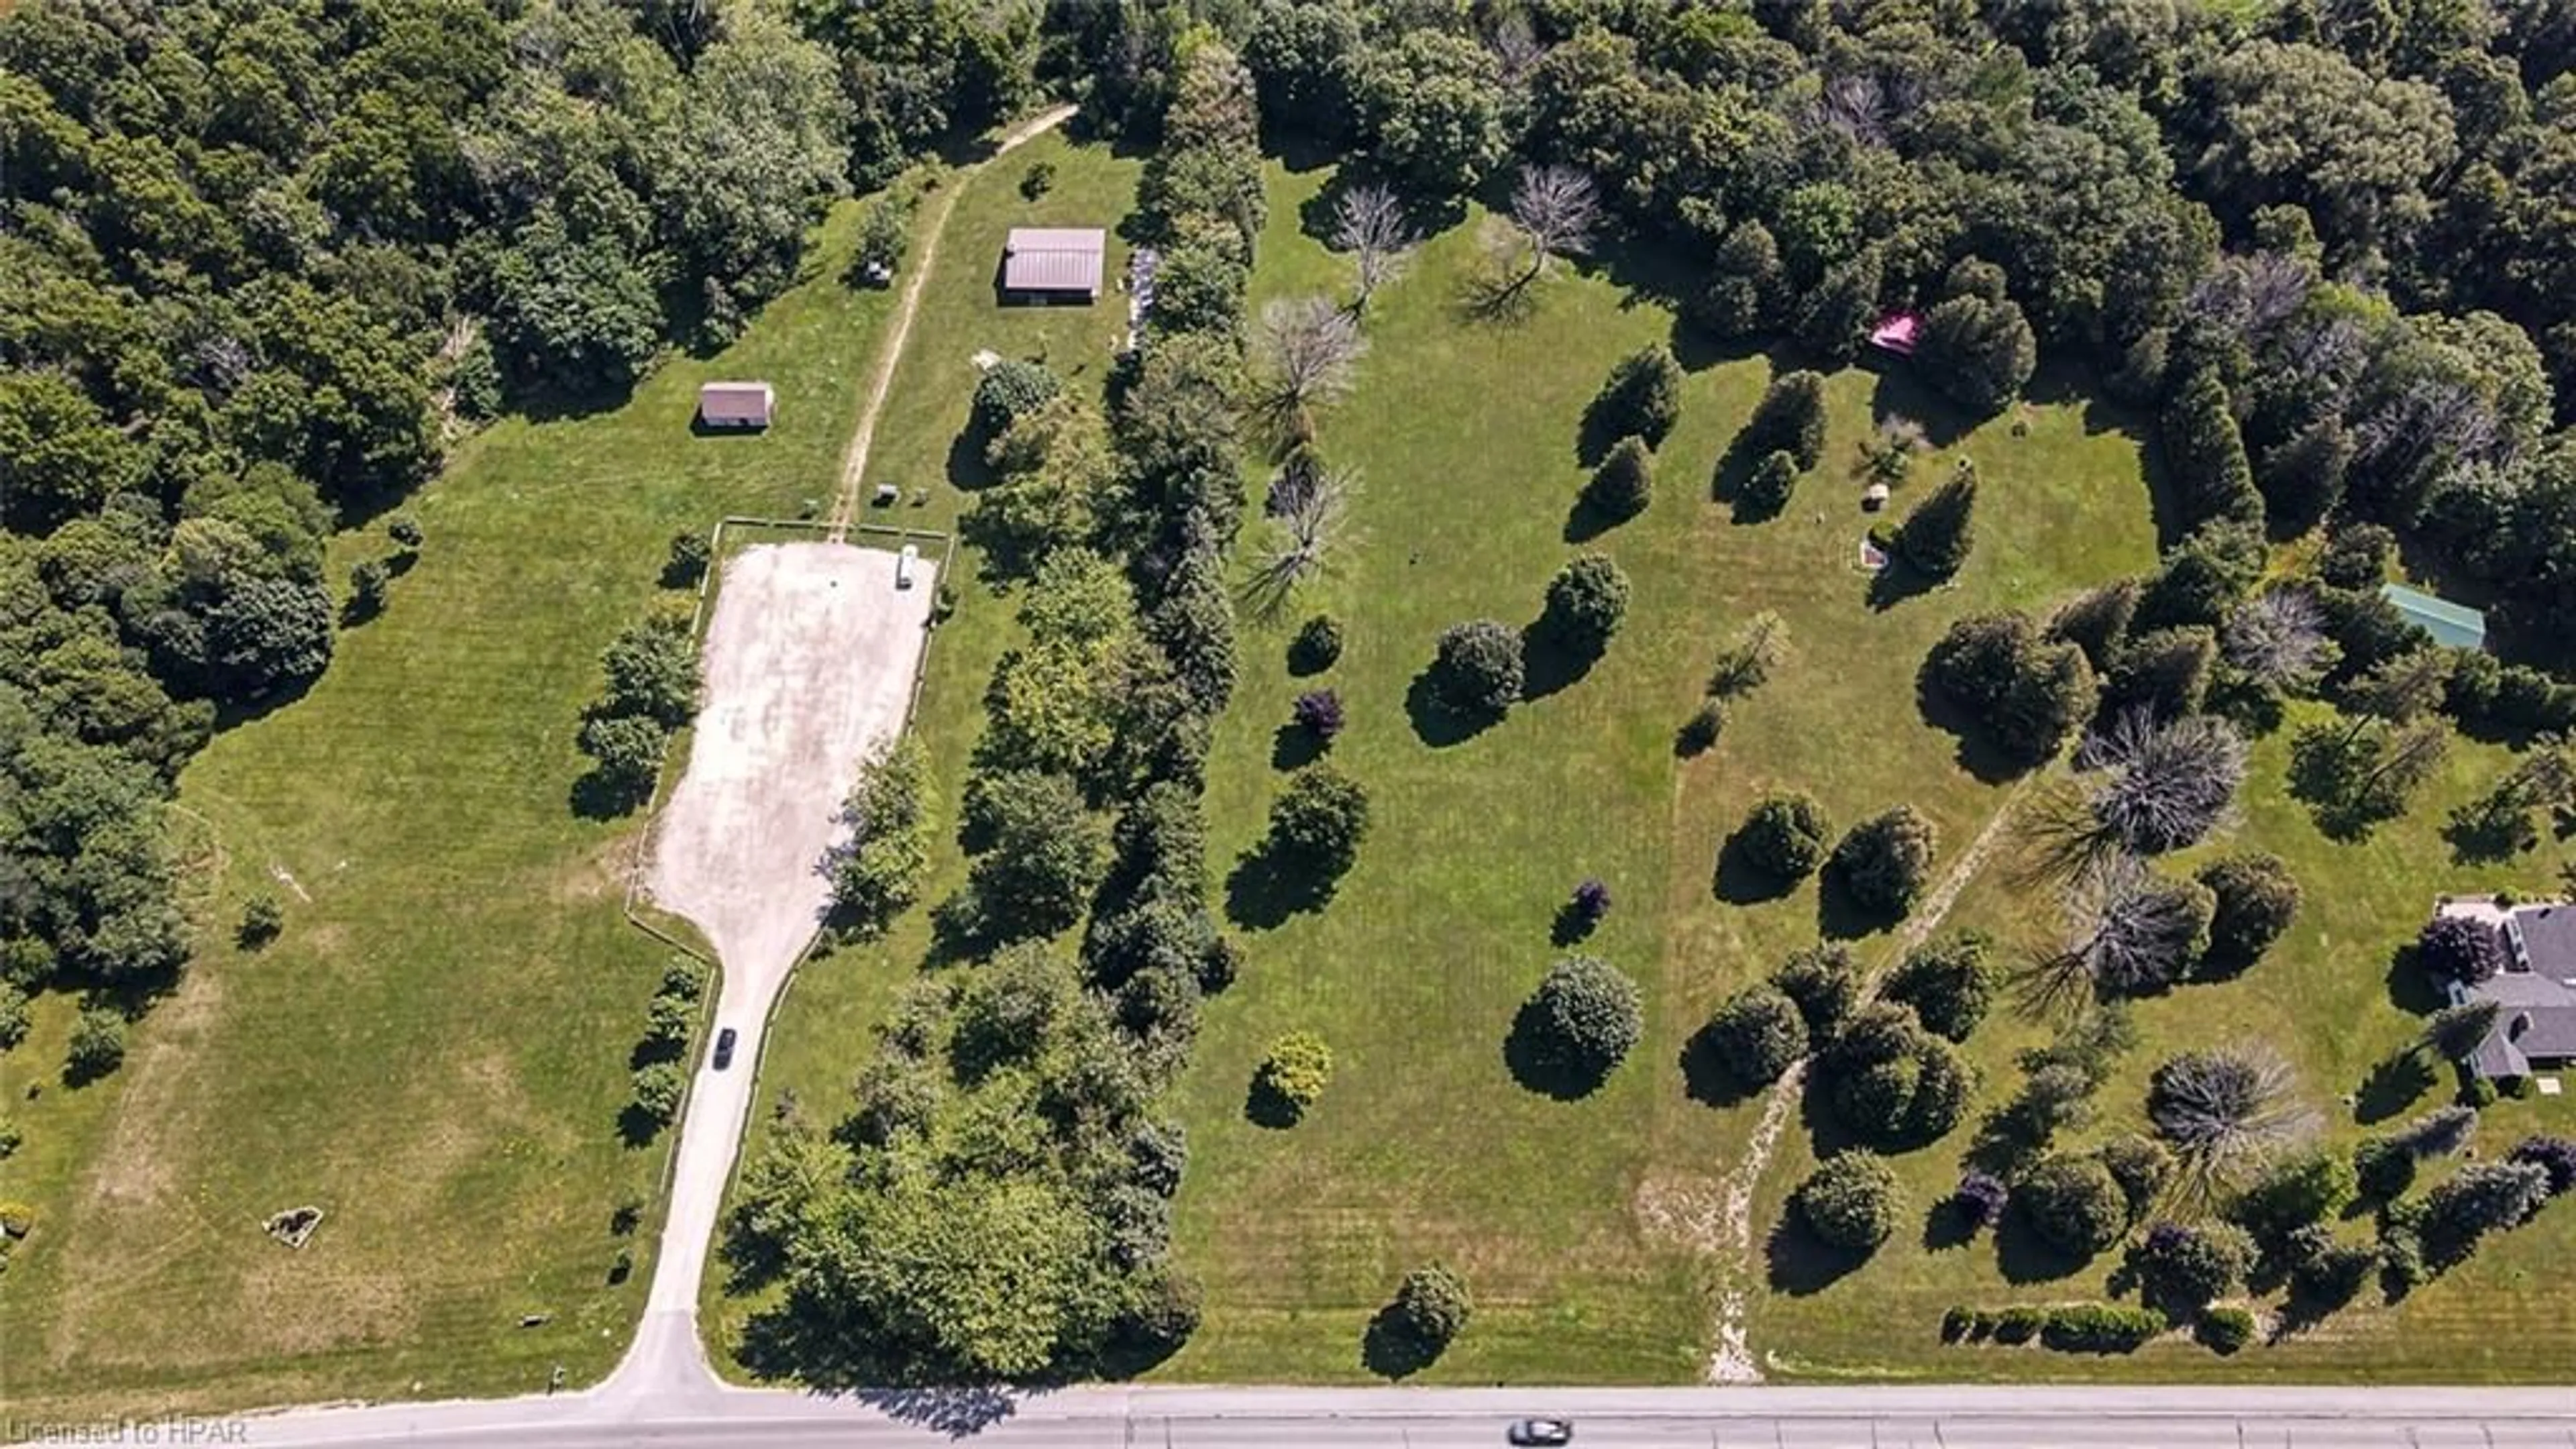 Fenced yard for PT LOT 41 AND 5 London Rd, Clinton Ontario N0M 1L0